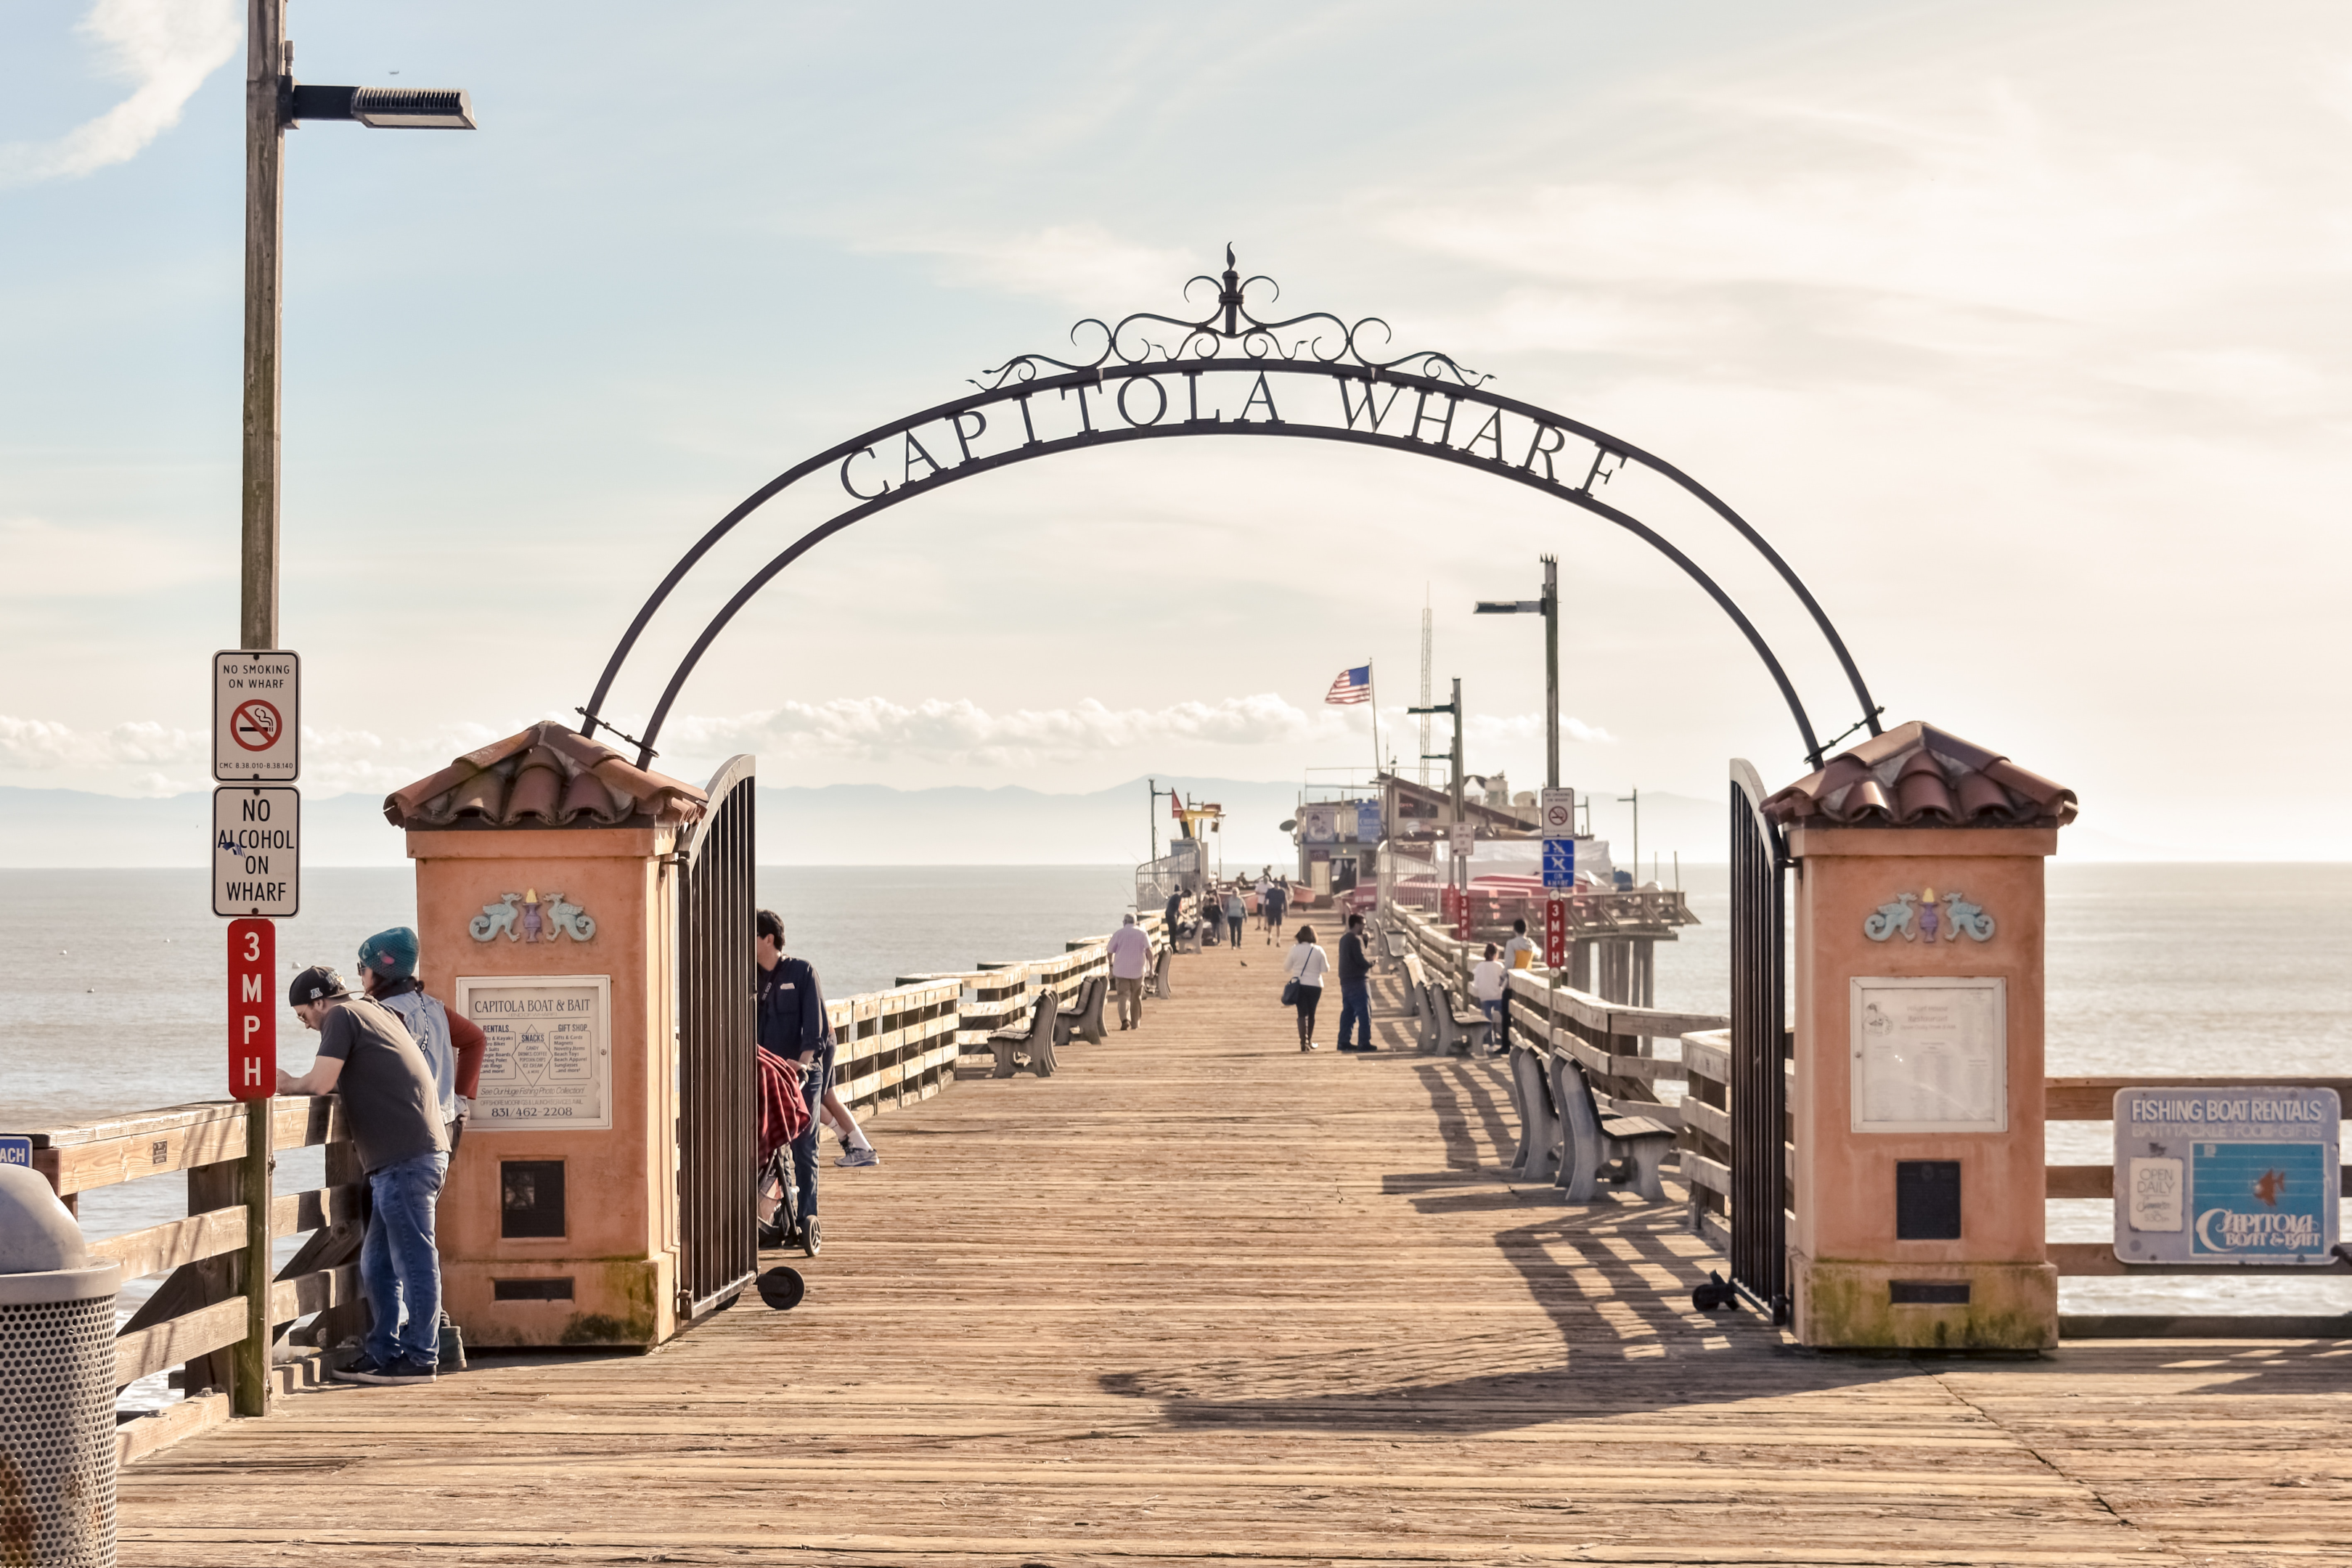 An image of the wharf in Capitola ca